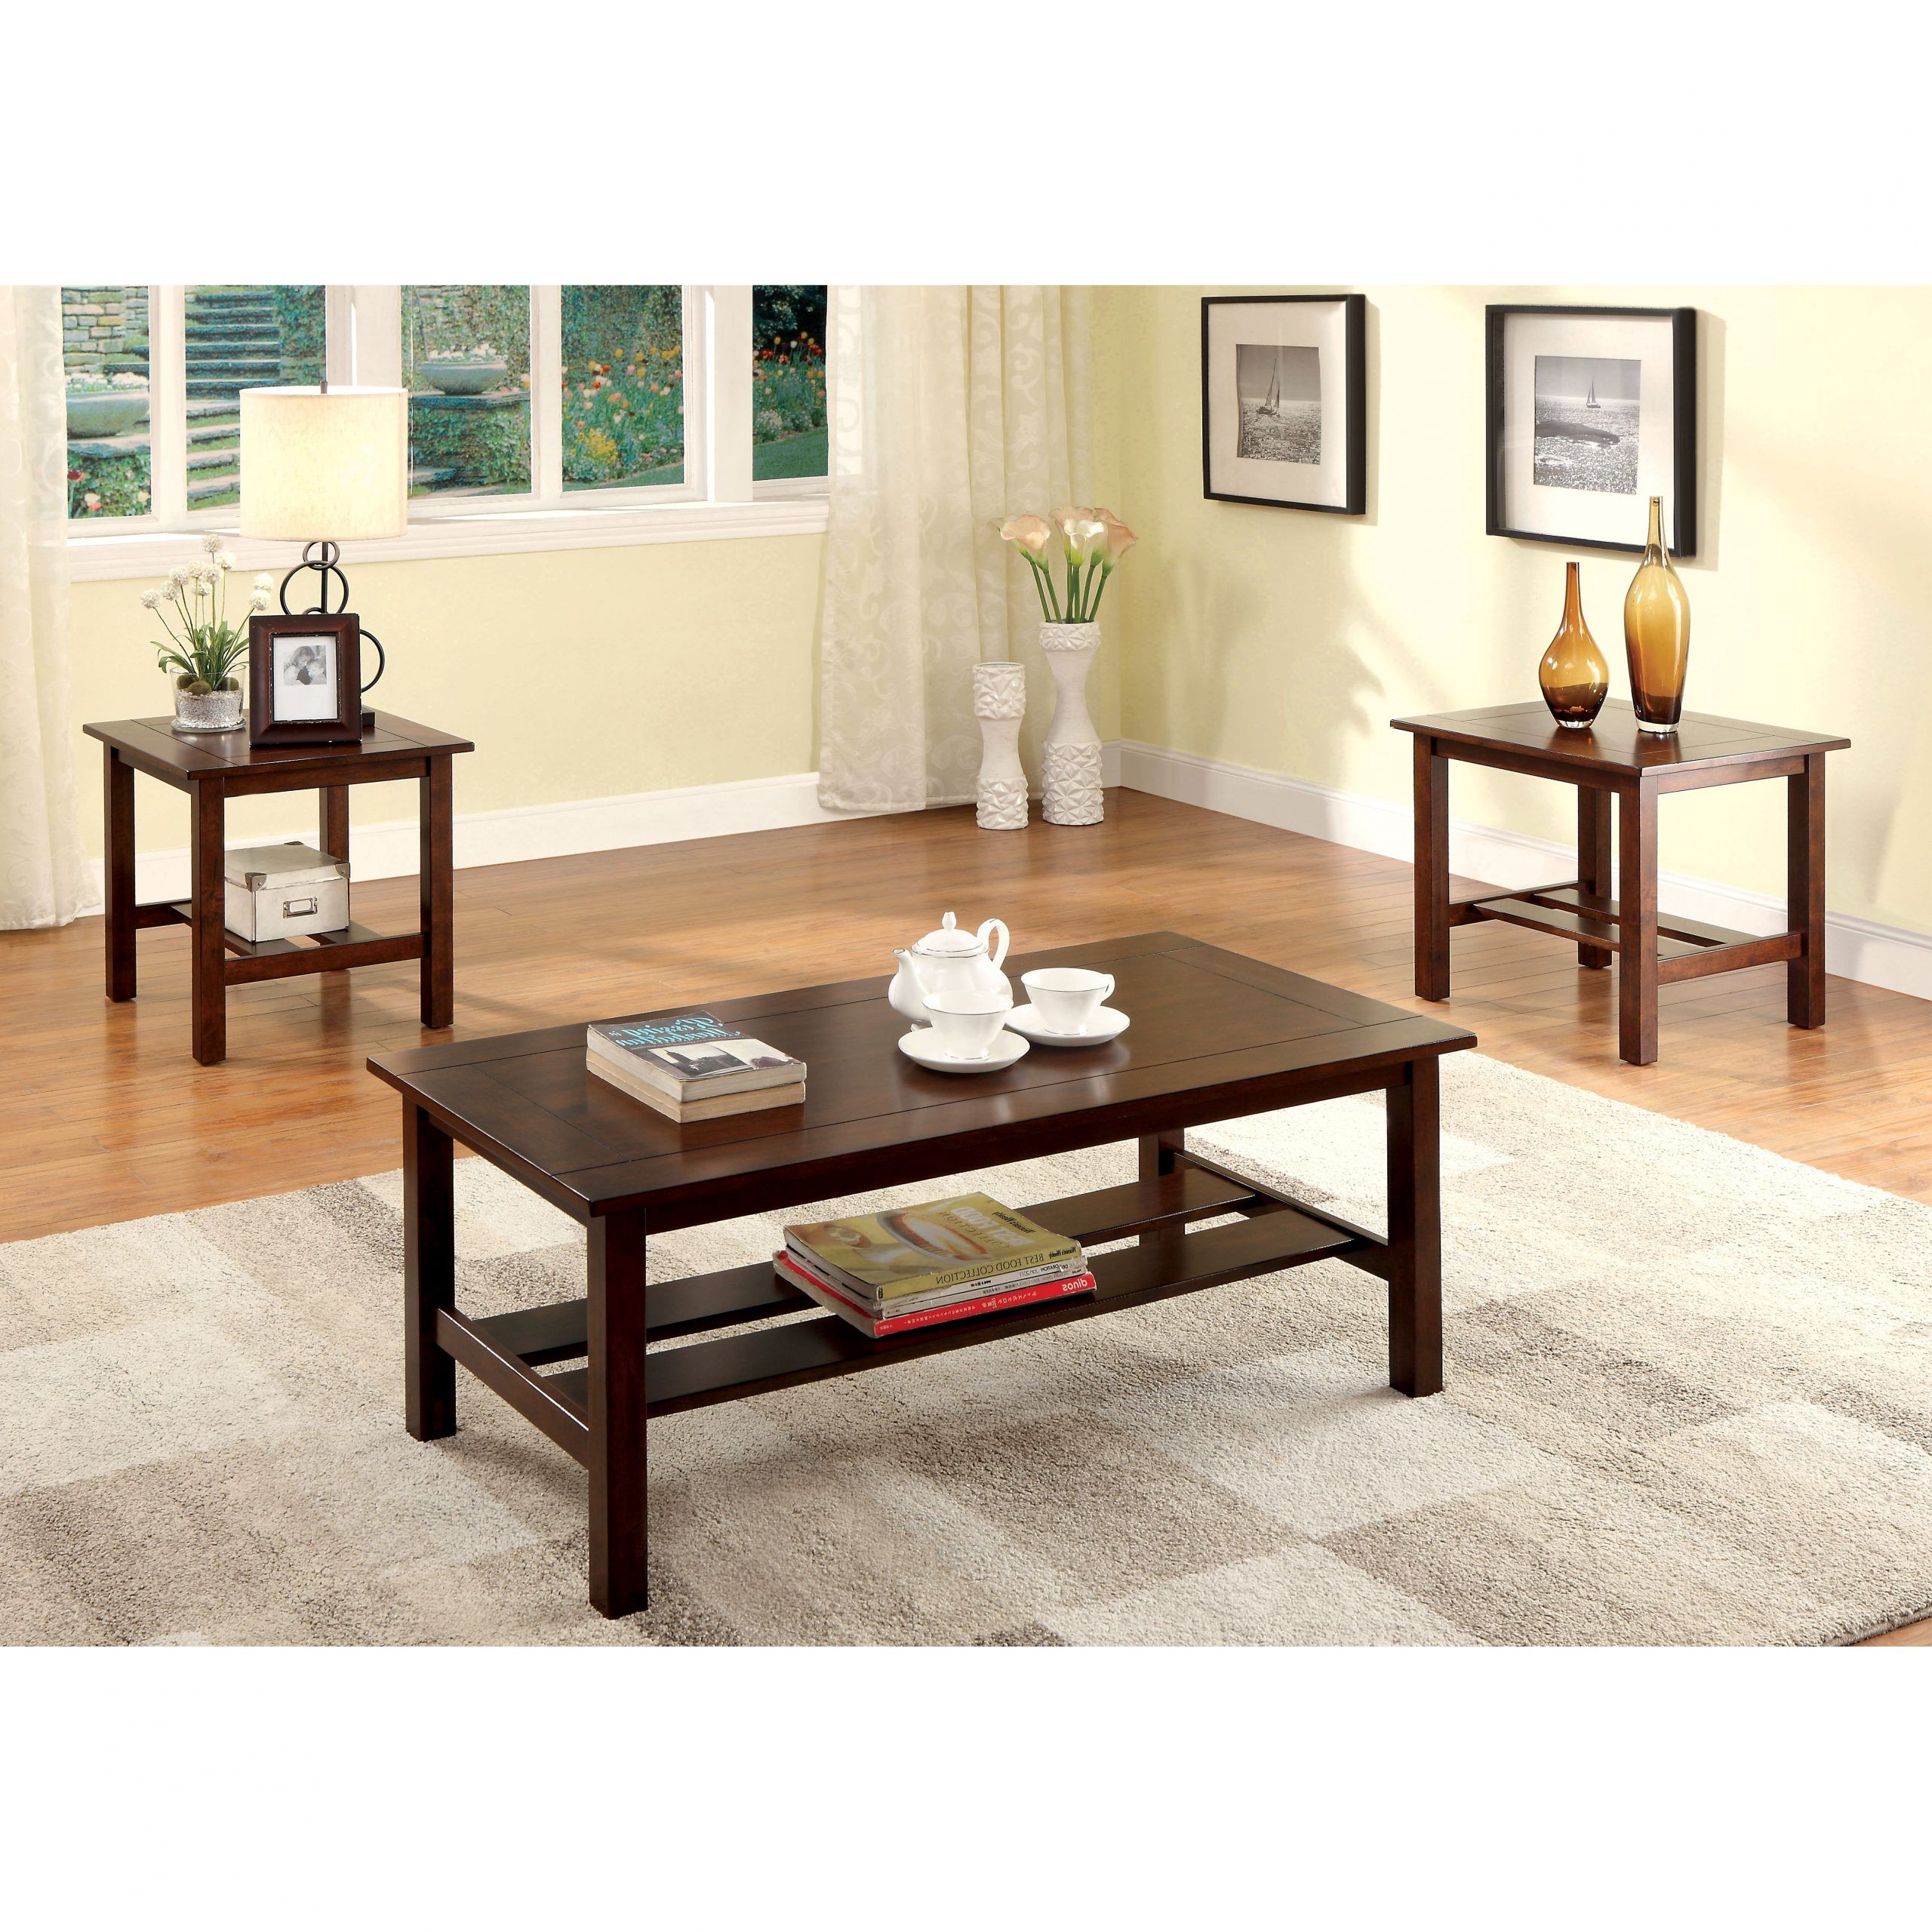 Most Recent Hokku Designs Klohe 3 Piece Coffee Table Set & Reviews In 3 Piece Coffee Tables (View 8 of 20)